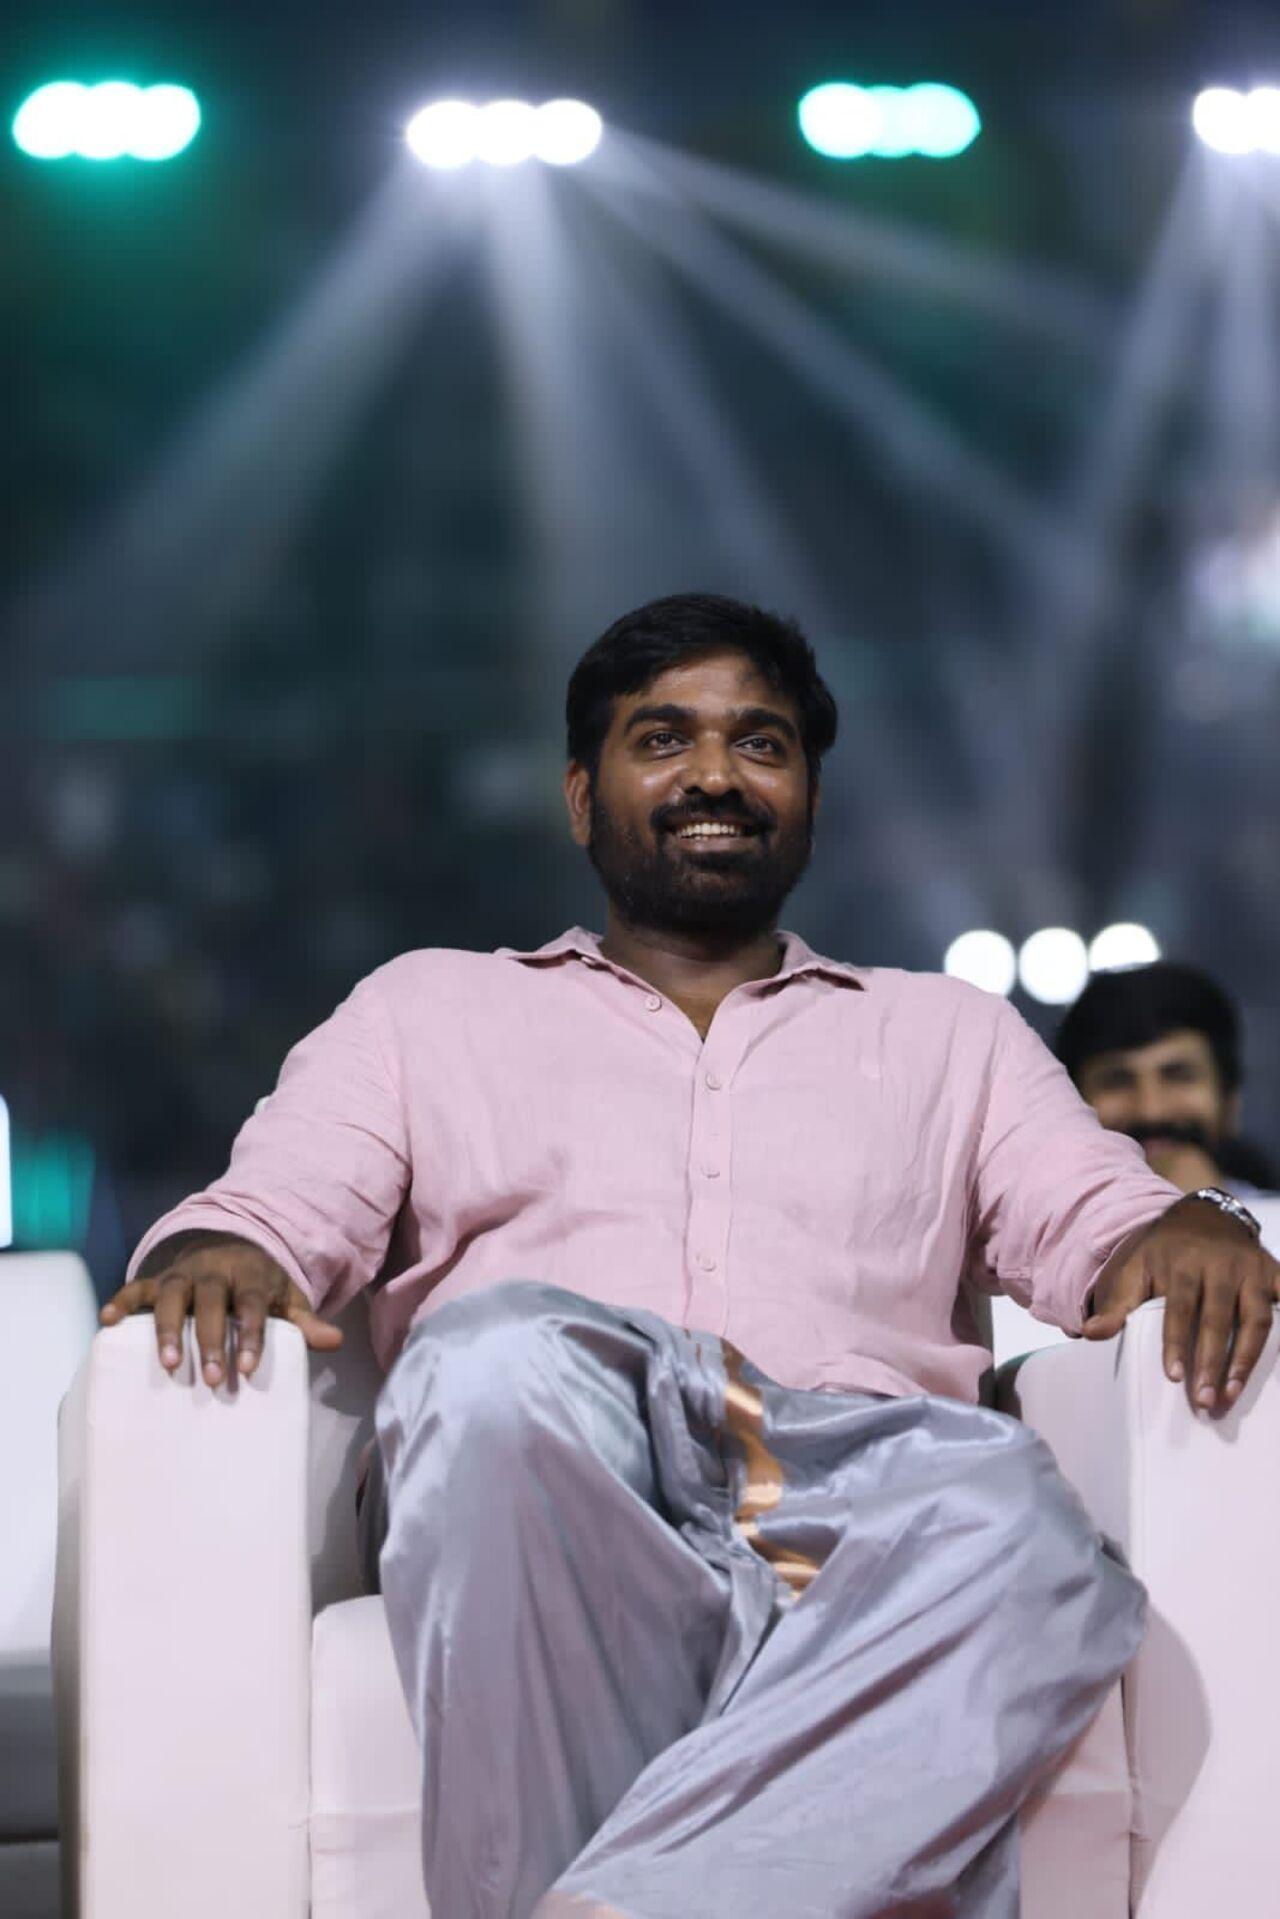 Vijay Sethupathi, the antagonist of Jawan, also graced the event. Apparently, his name in the film is Jaffar